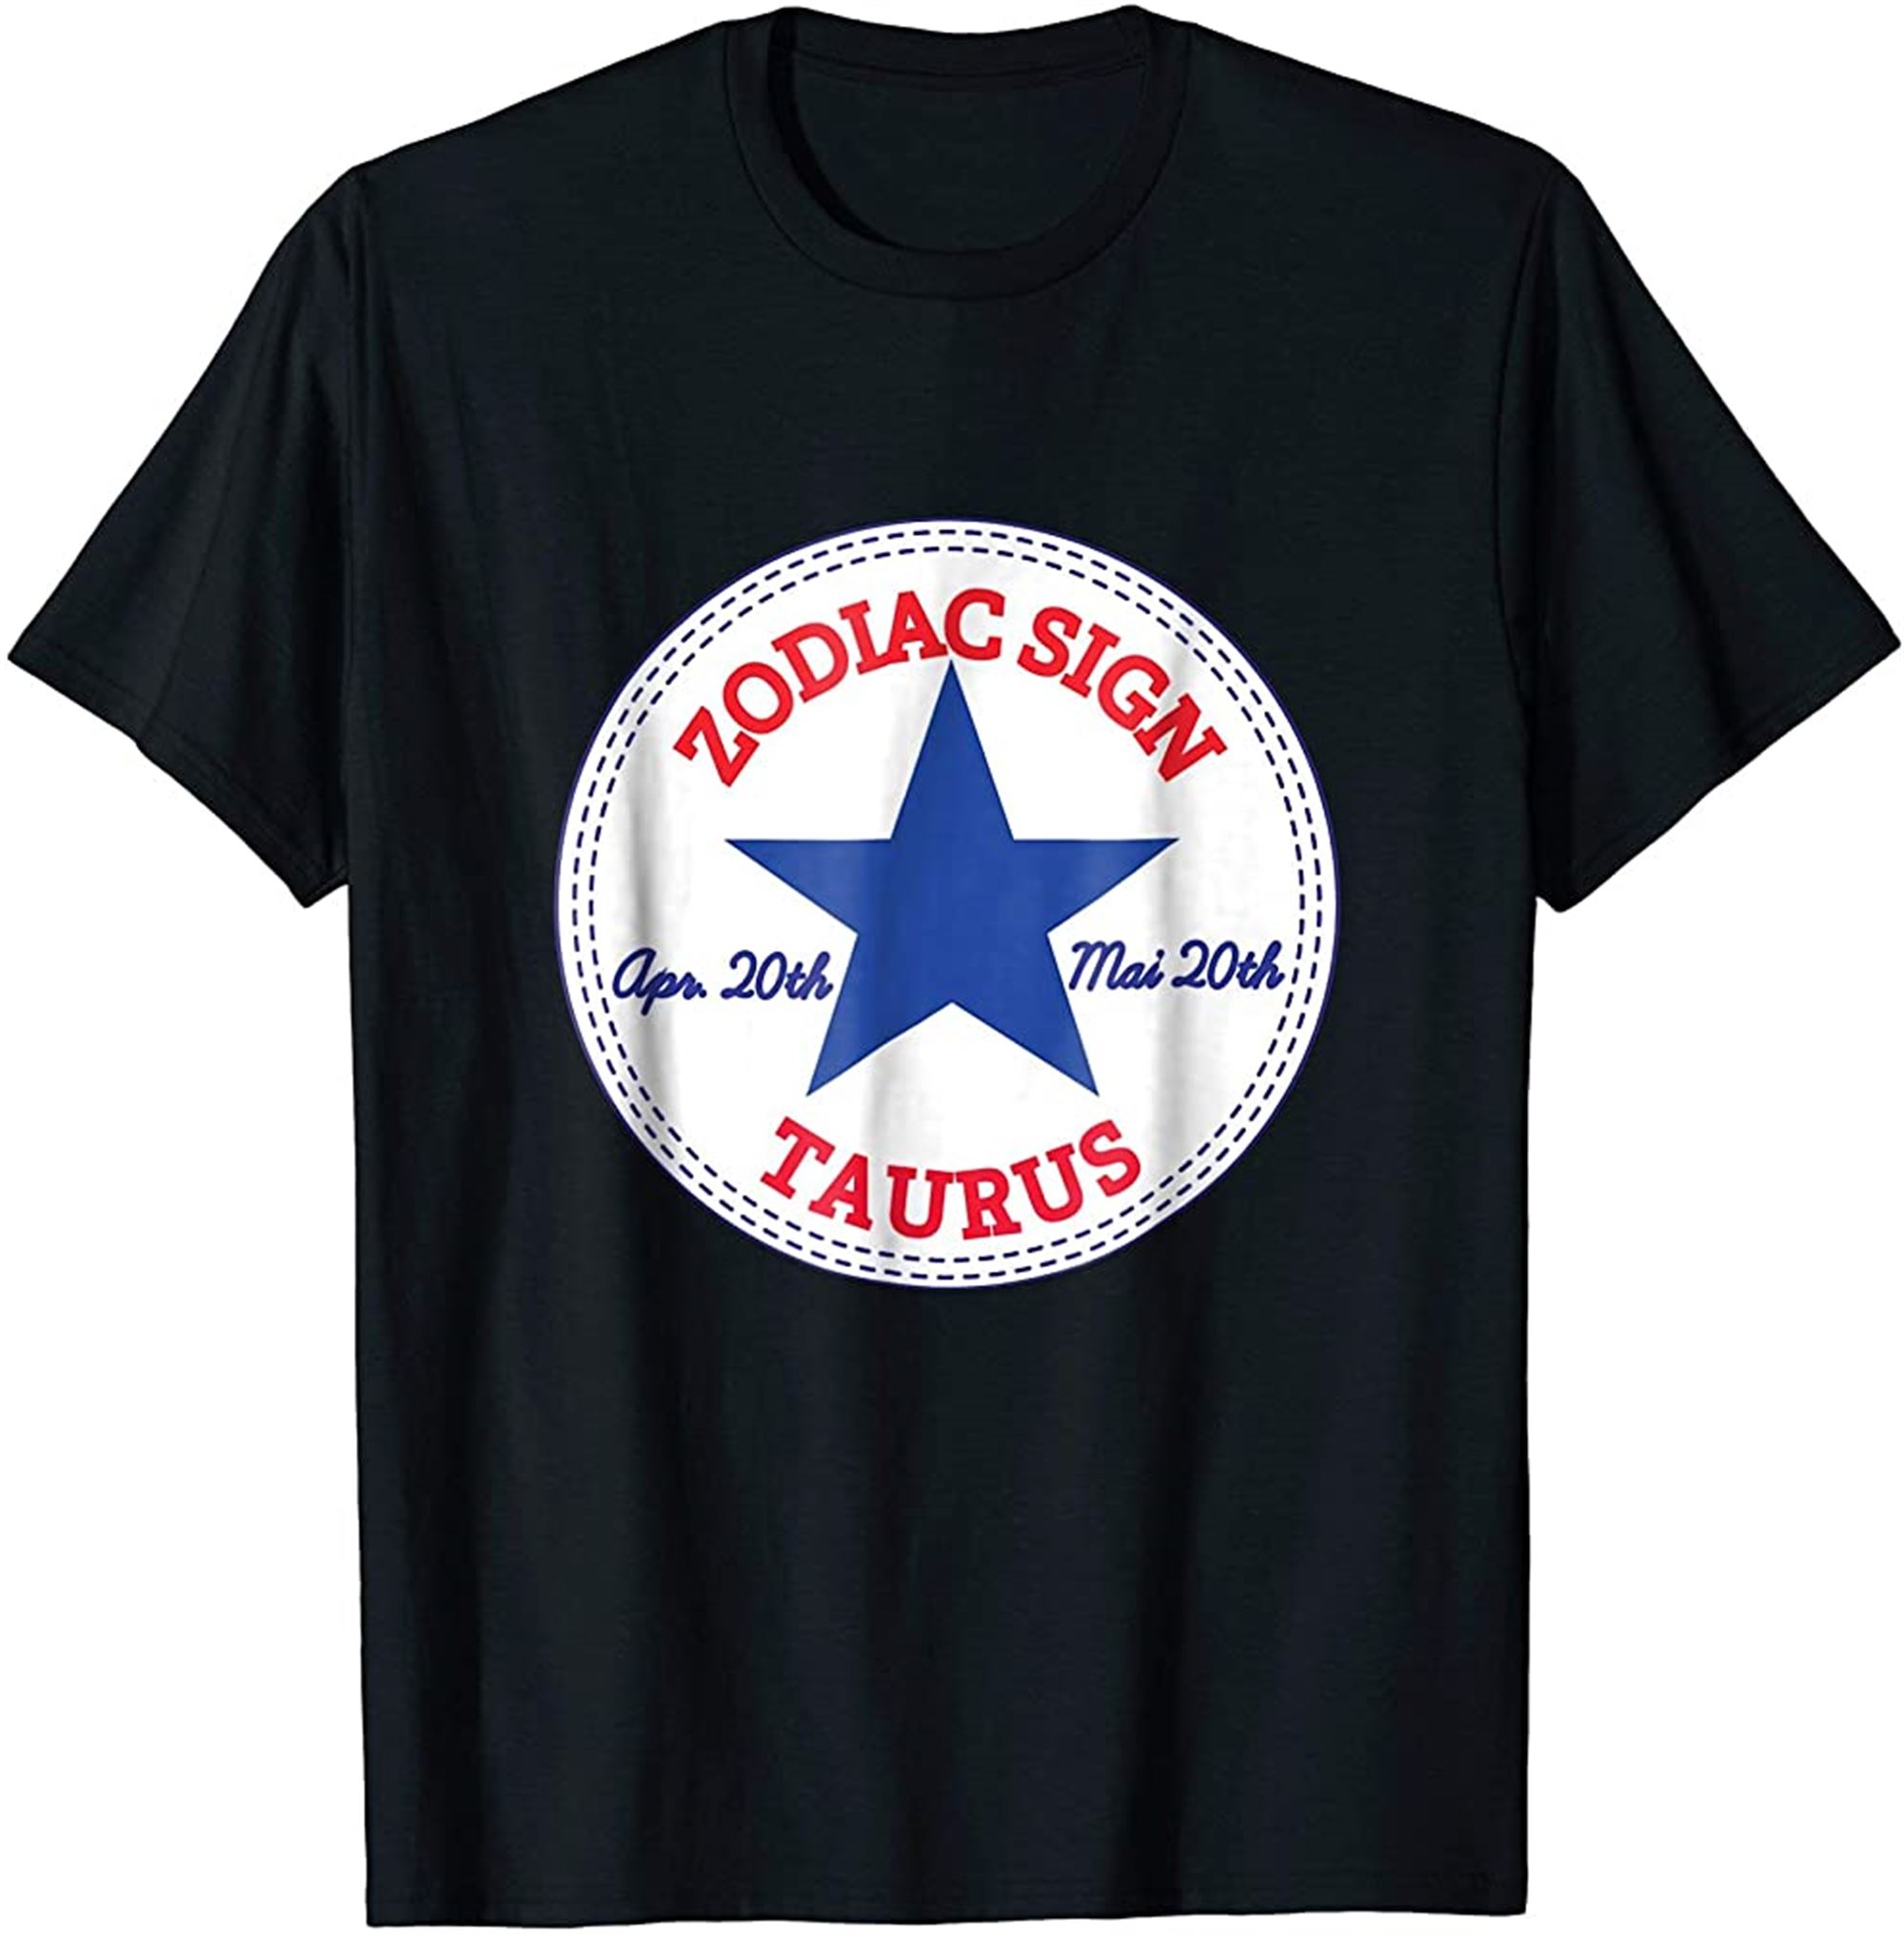 Sign Taurus T-shirt Born In April And May Full Size Up To 5xl